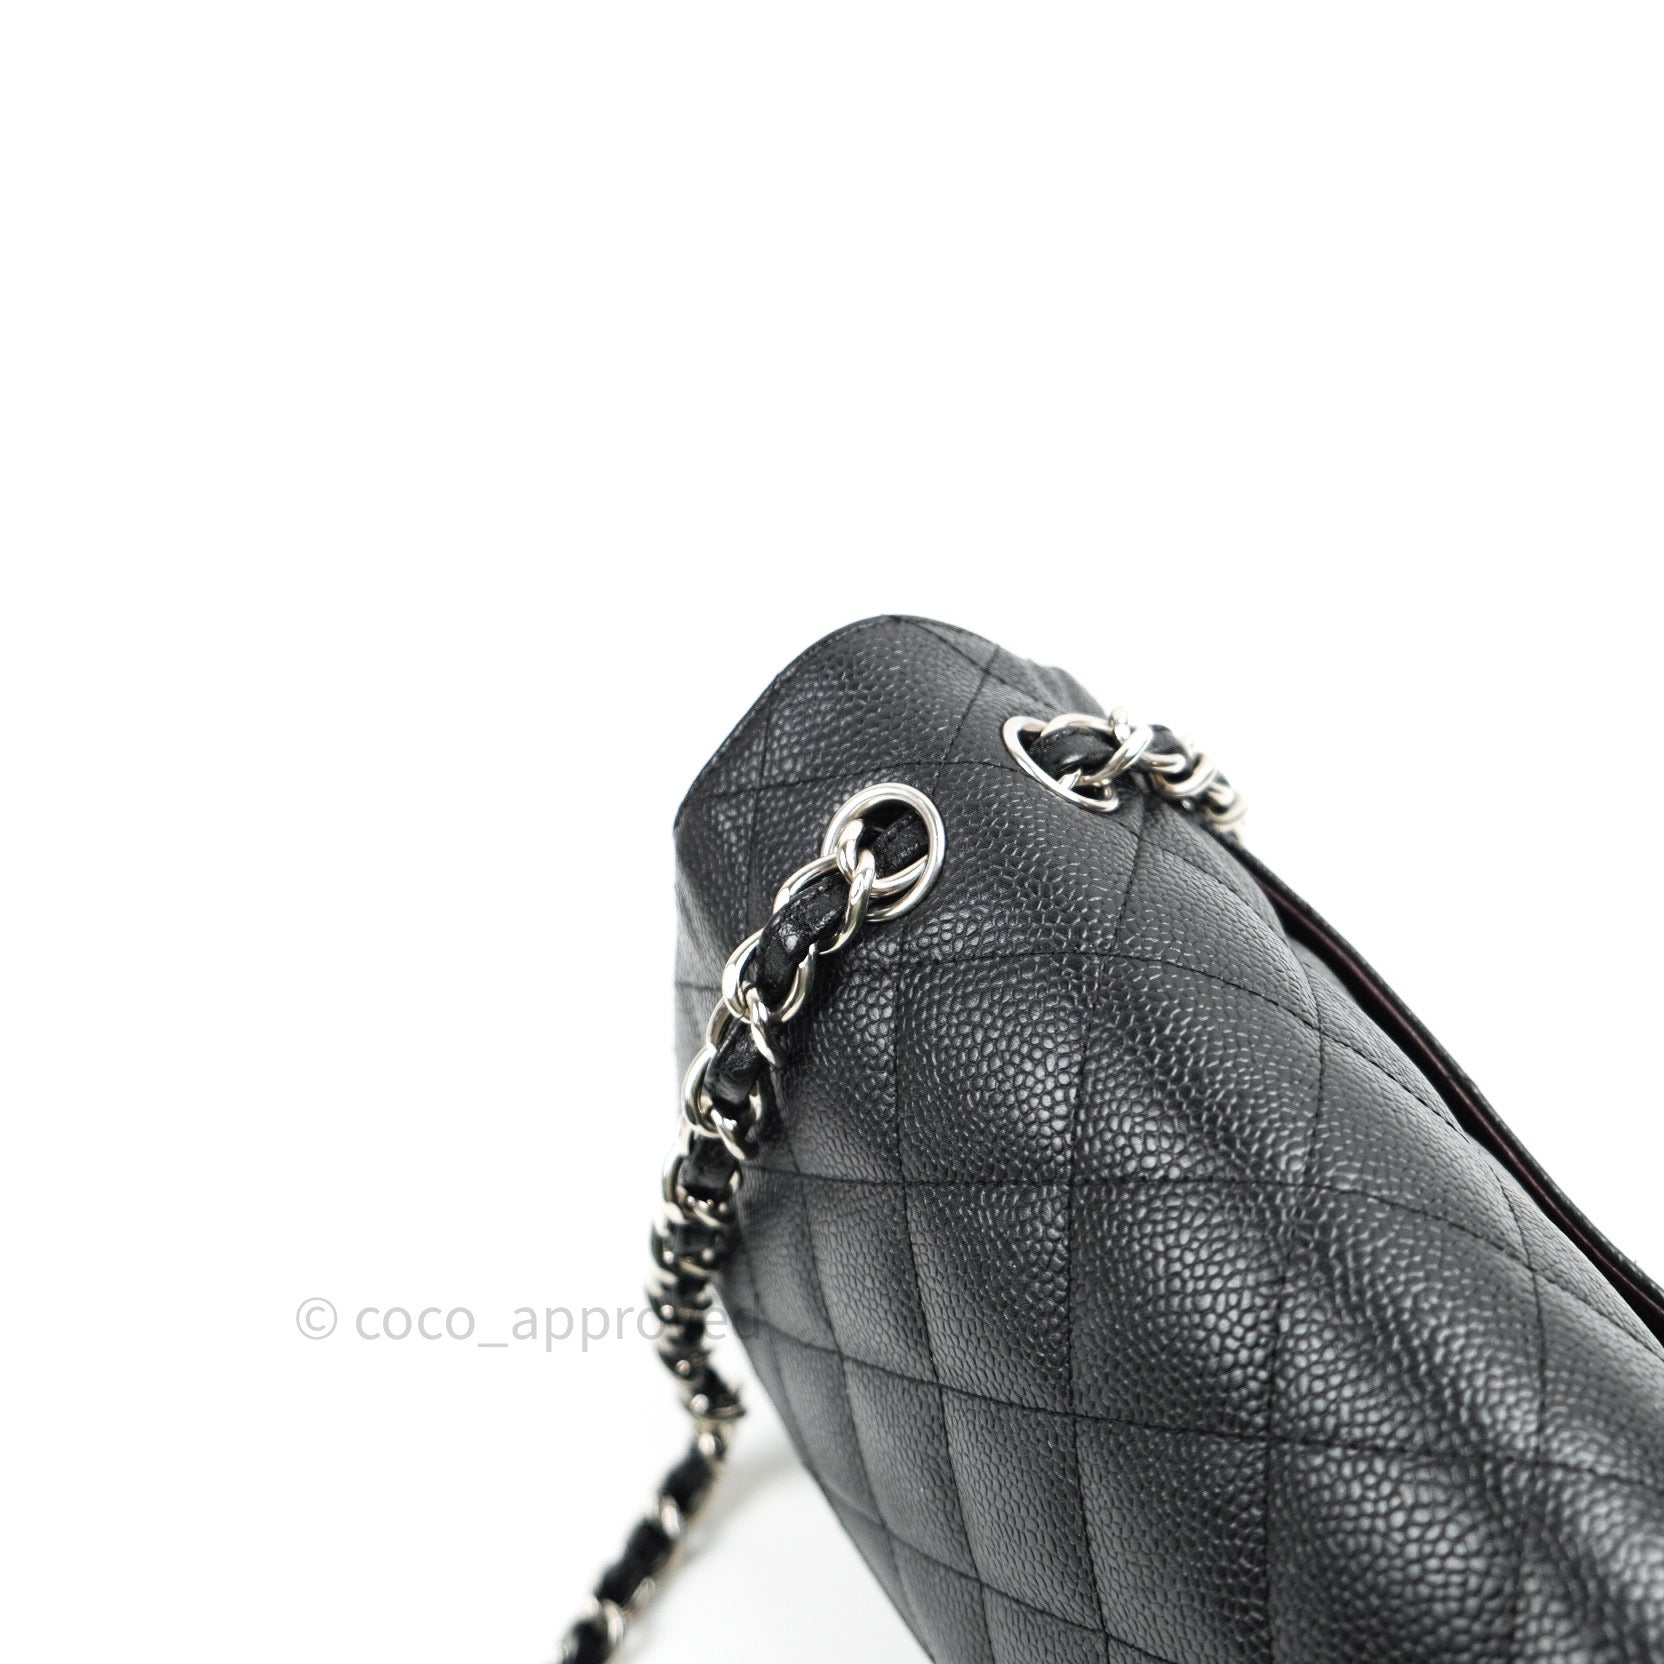 Chanel Jumbo Double Flap Black Caviar Silver Hardware⁣⁣ – Coco Approved  Studio